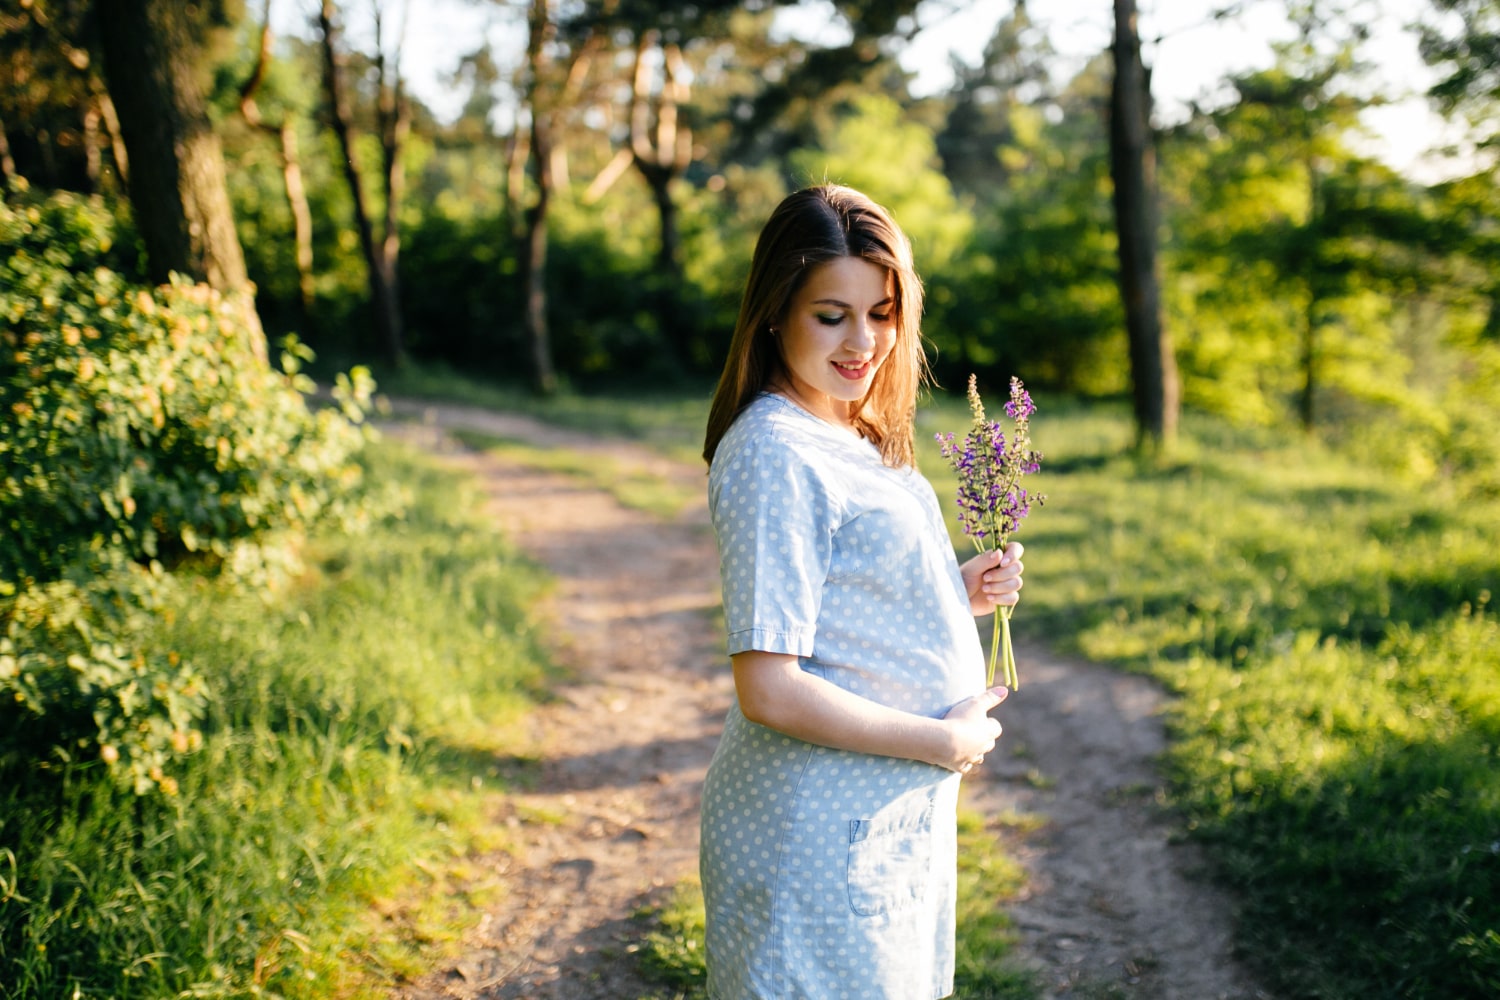  Timeless Maternity Photography: Empowering Women Through Captured Moments